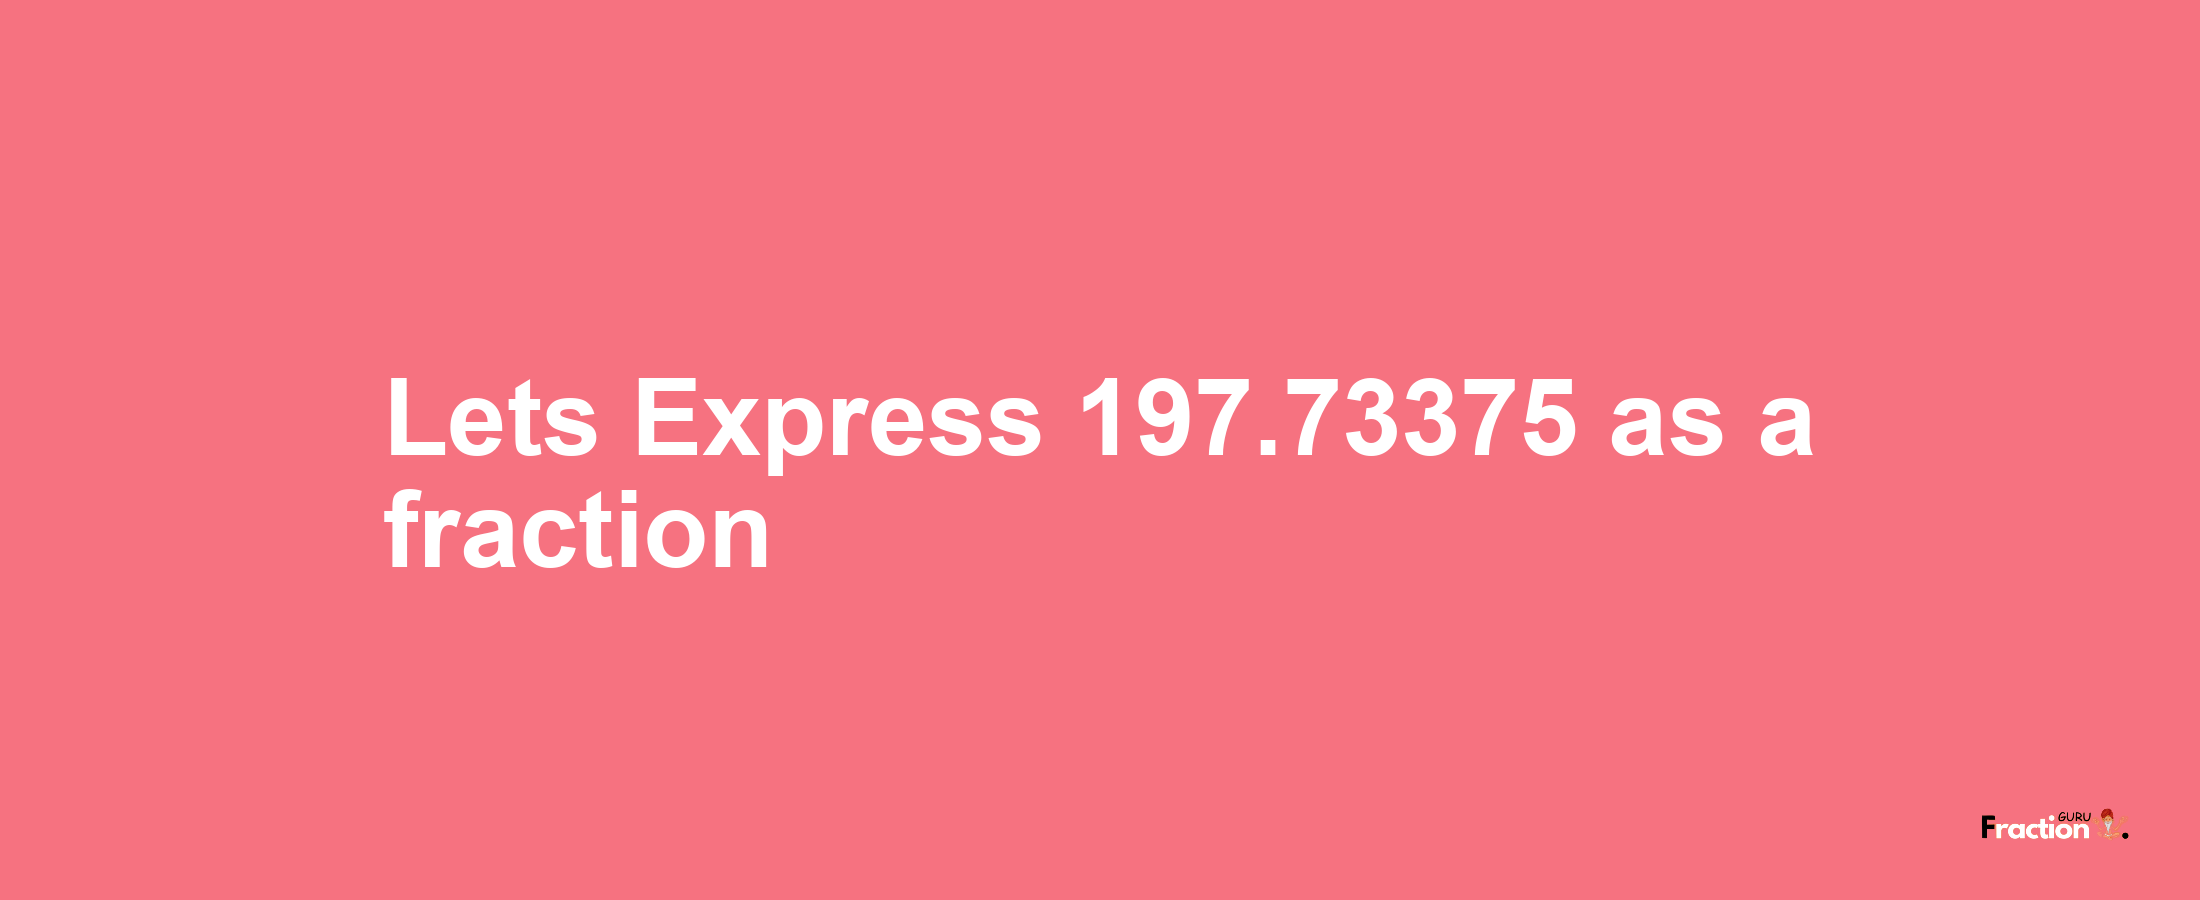 Lets Express 197.73375 as afraction